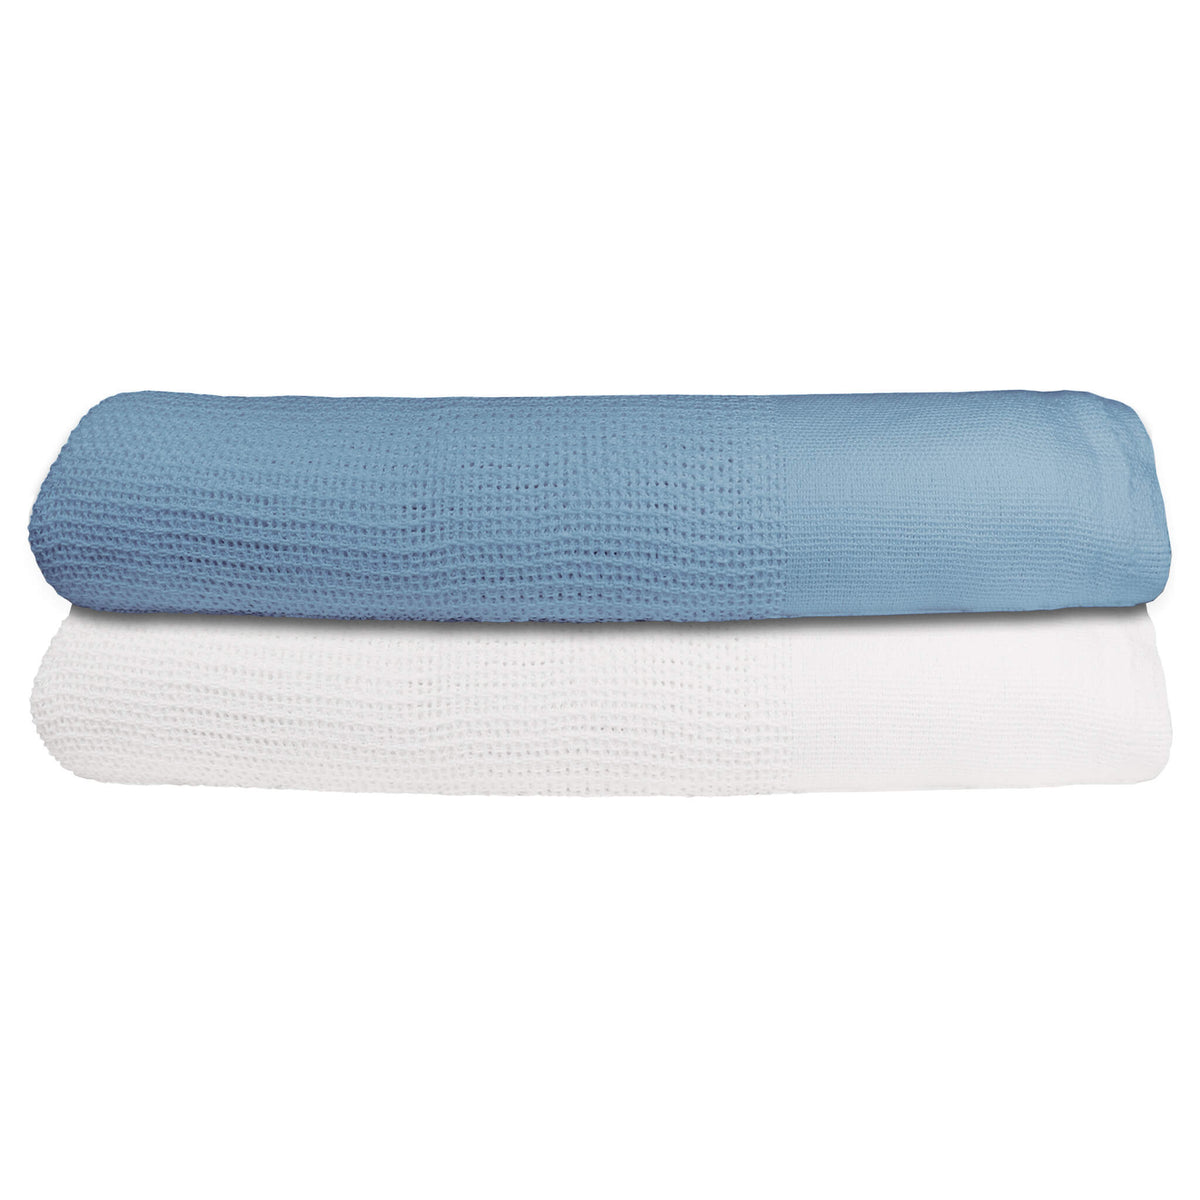 Thermal Patient Blankets for Hospitality | 100% Cotton